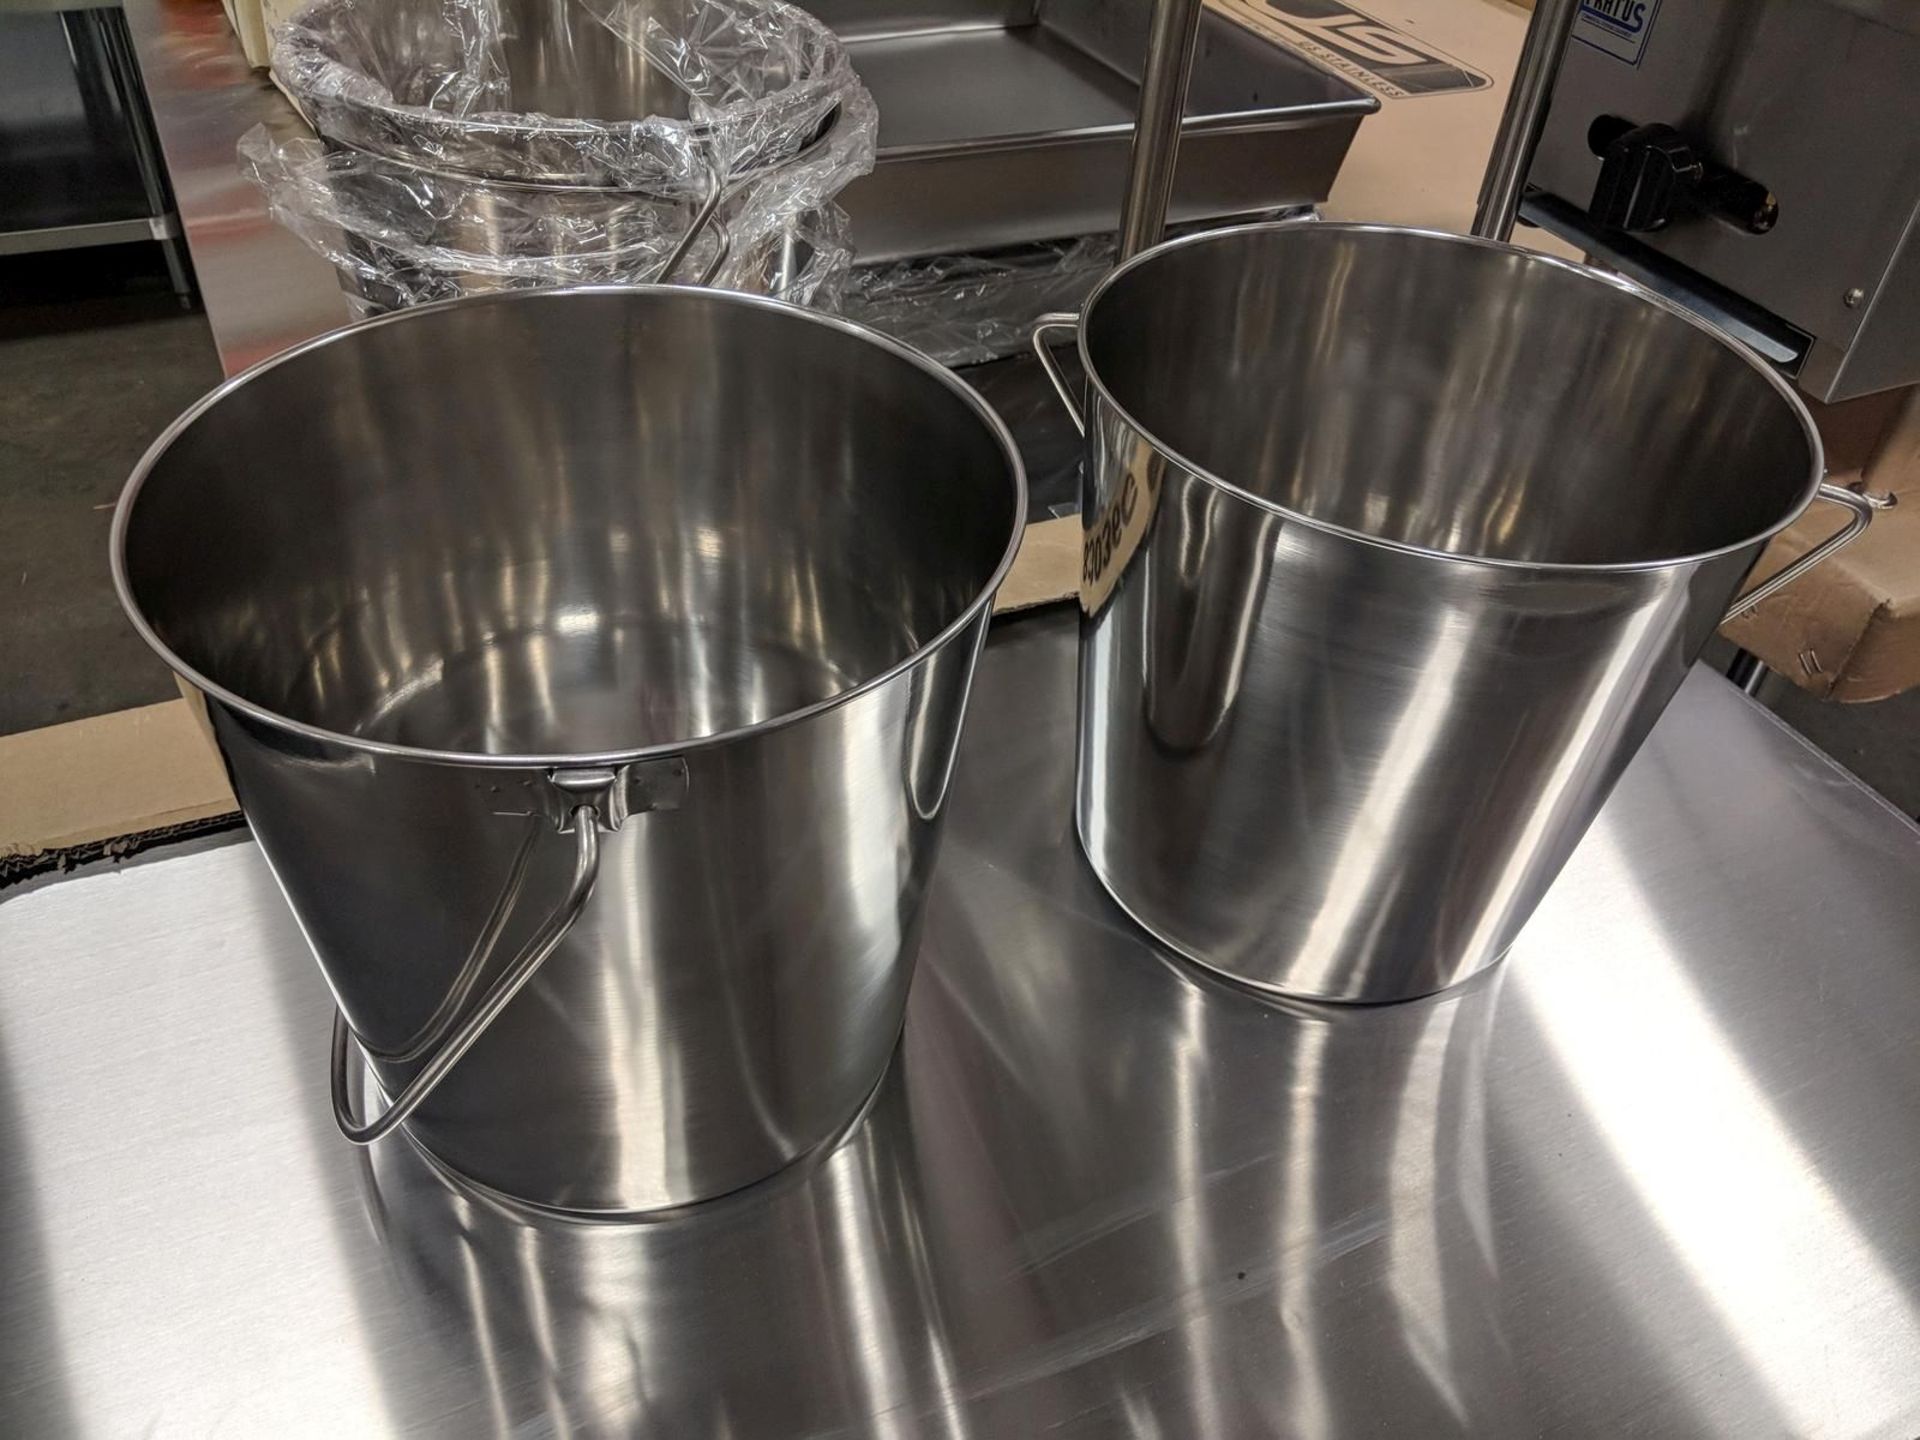 13qt Stainless Steel Utility Pails - Lot of 2